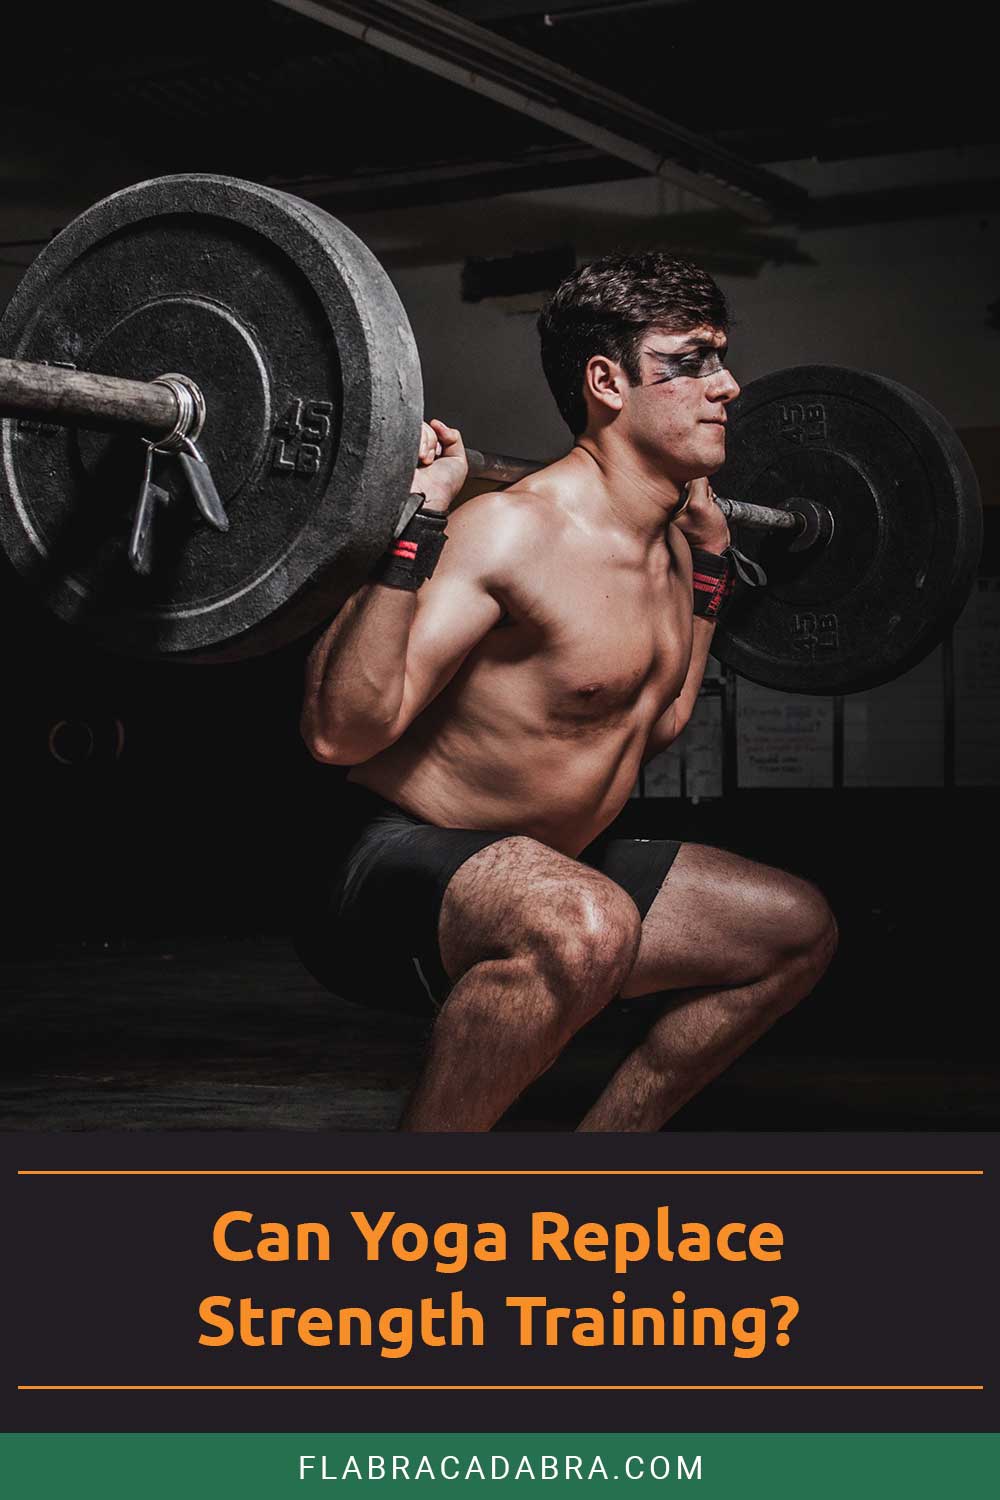 Man in black shorts lifting weight - Can Yoga Replace Strength Training?